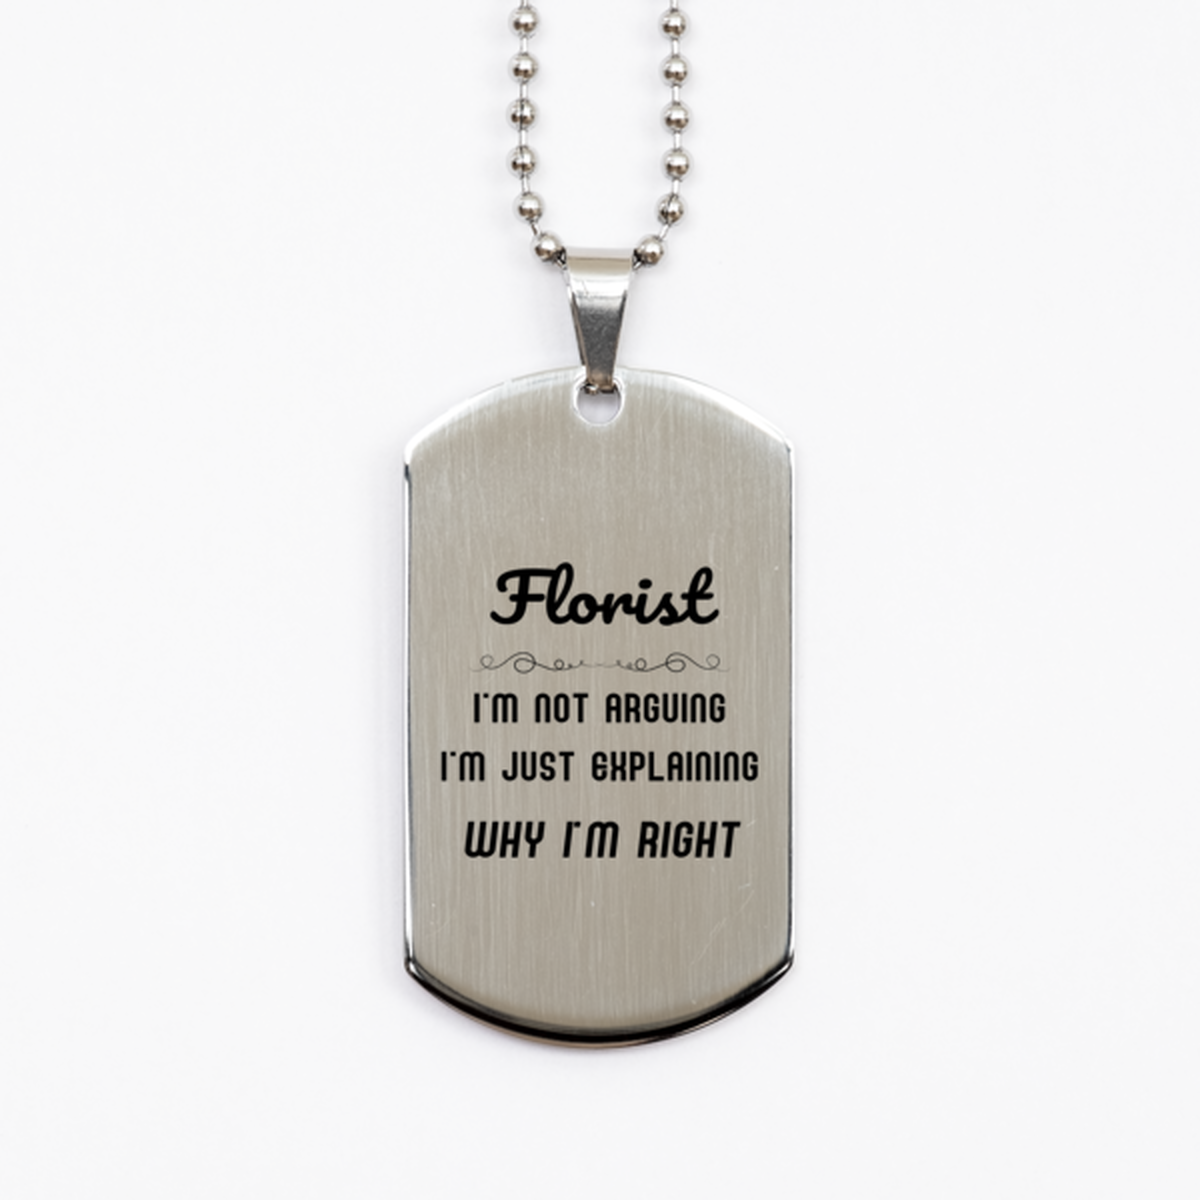 Florist I'm not Arguing. I'm Just Explaining Why I'm RIGHT Silver Dog Tag, Funny Saying Quote Florist Gifts For Florist Graduation Birthday Christmas Gifts for Men Women Coworker